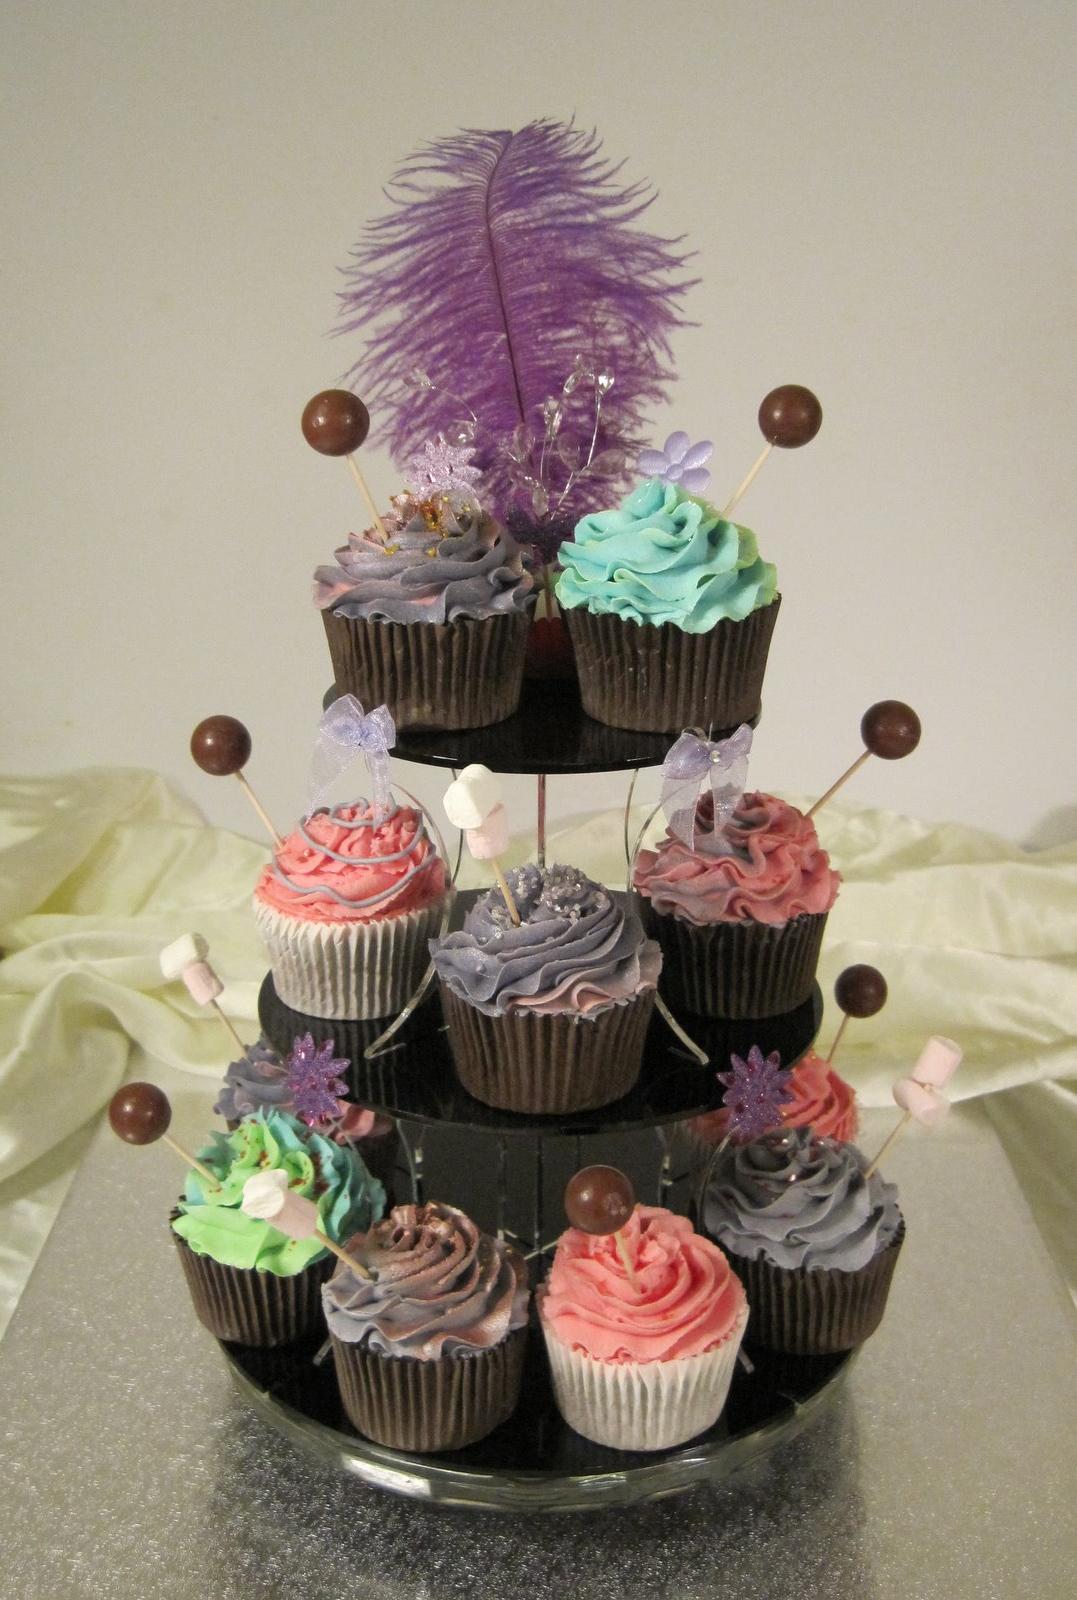 This cupcake tower is made of